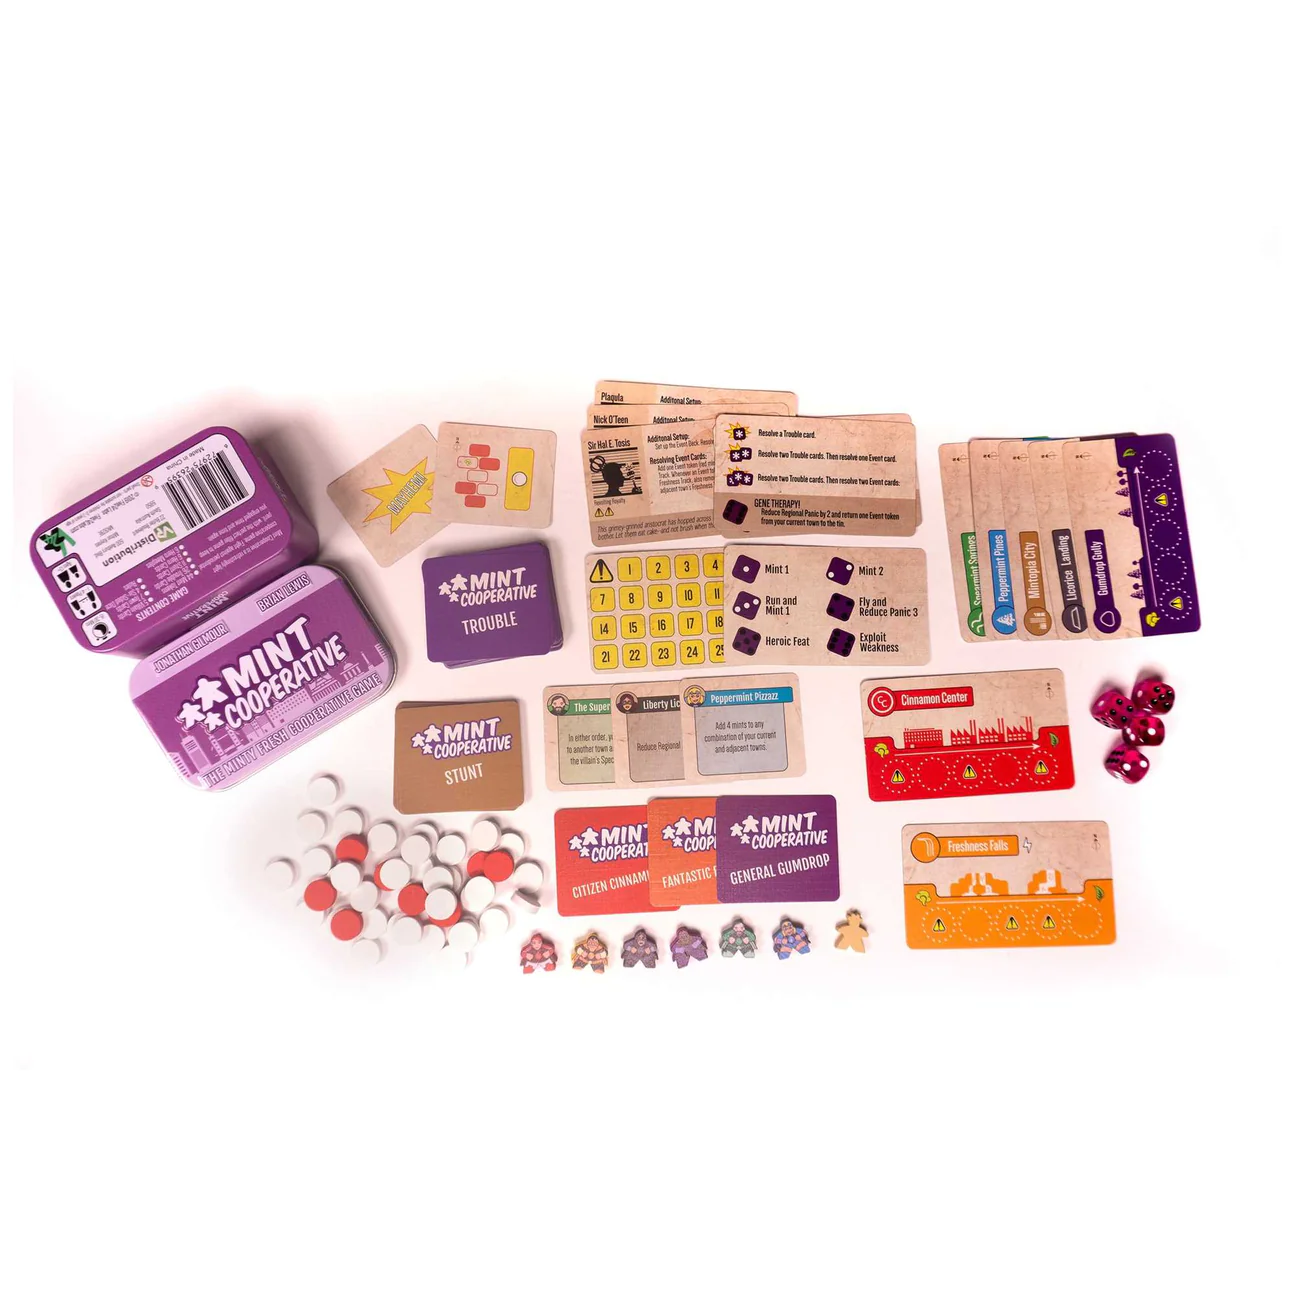 Mint Cooperative: Sweeten Your Game Night!